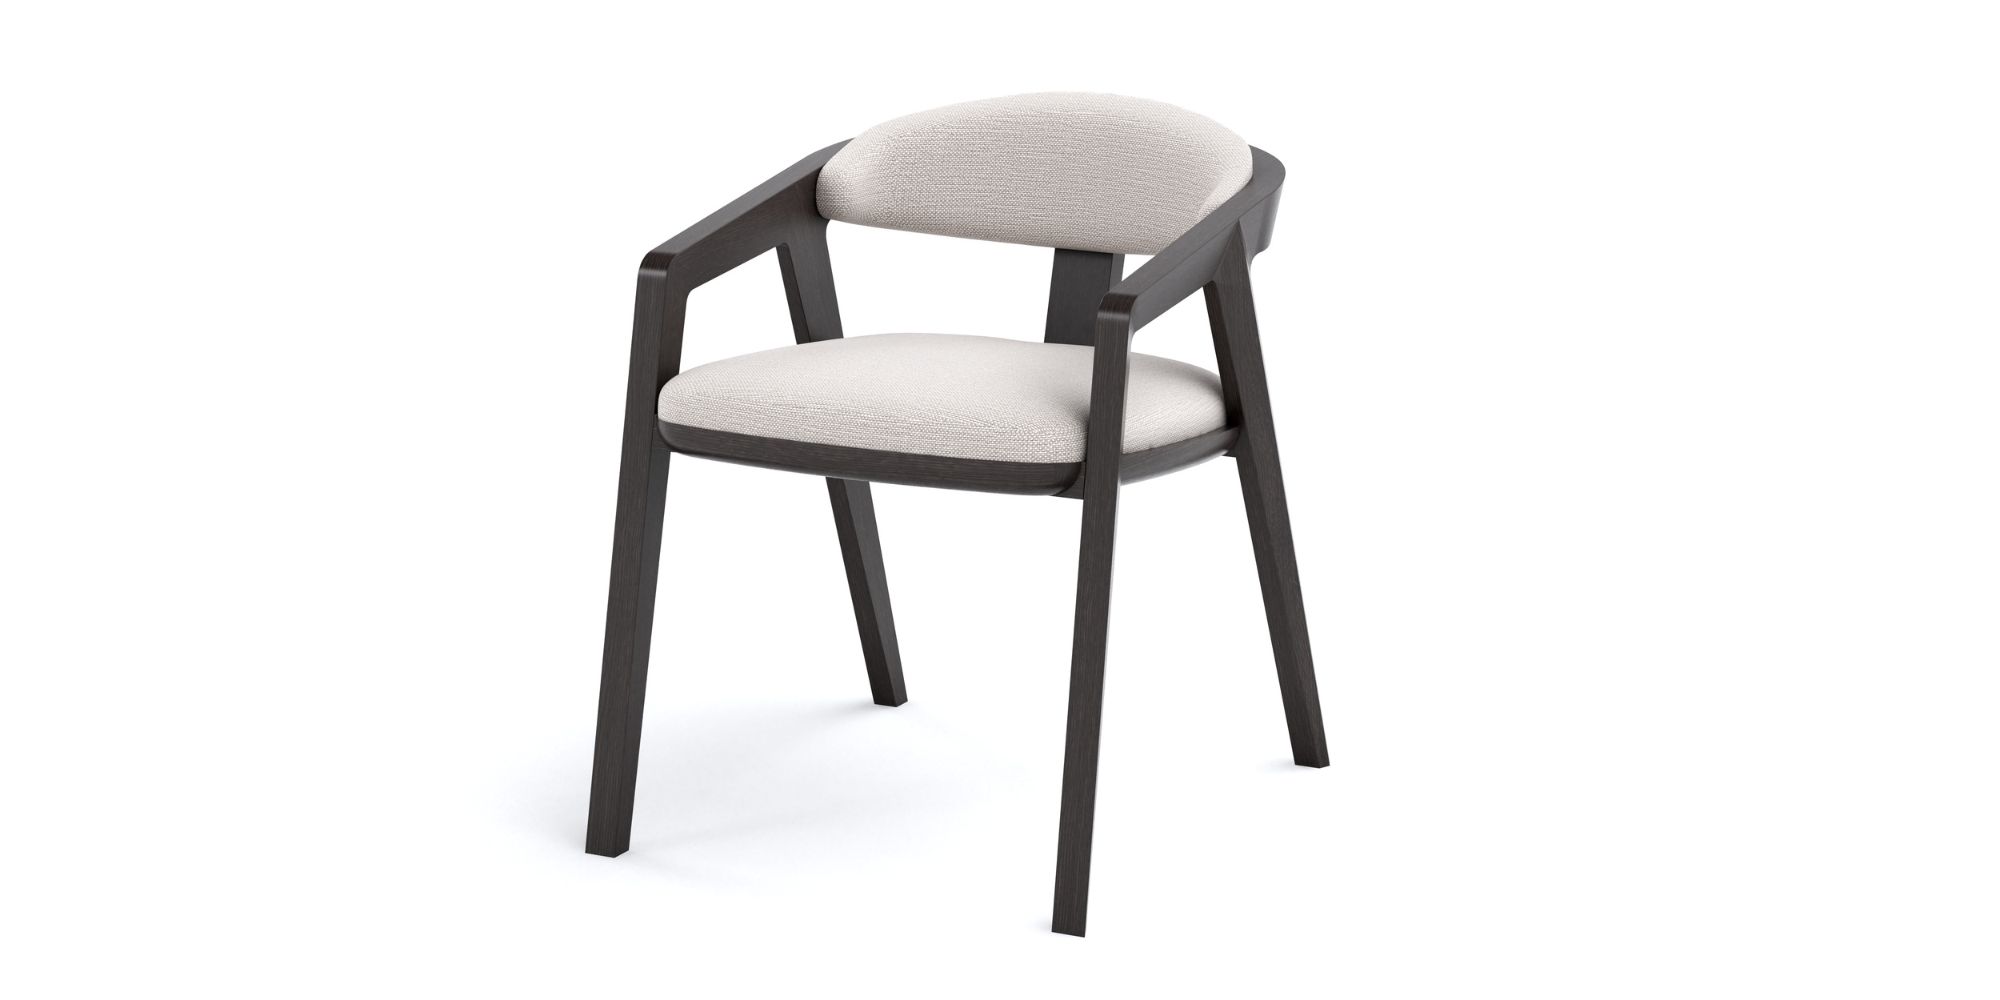 Coronet Dining Chair – Upholstered Back in Outdoor Dining Chairs for Coronet collection